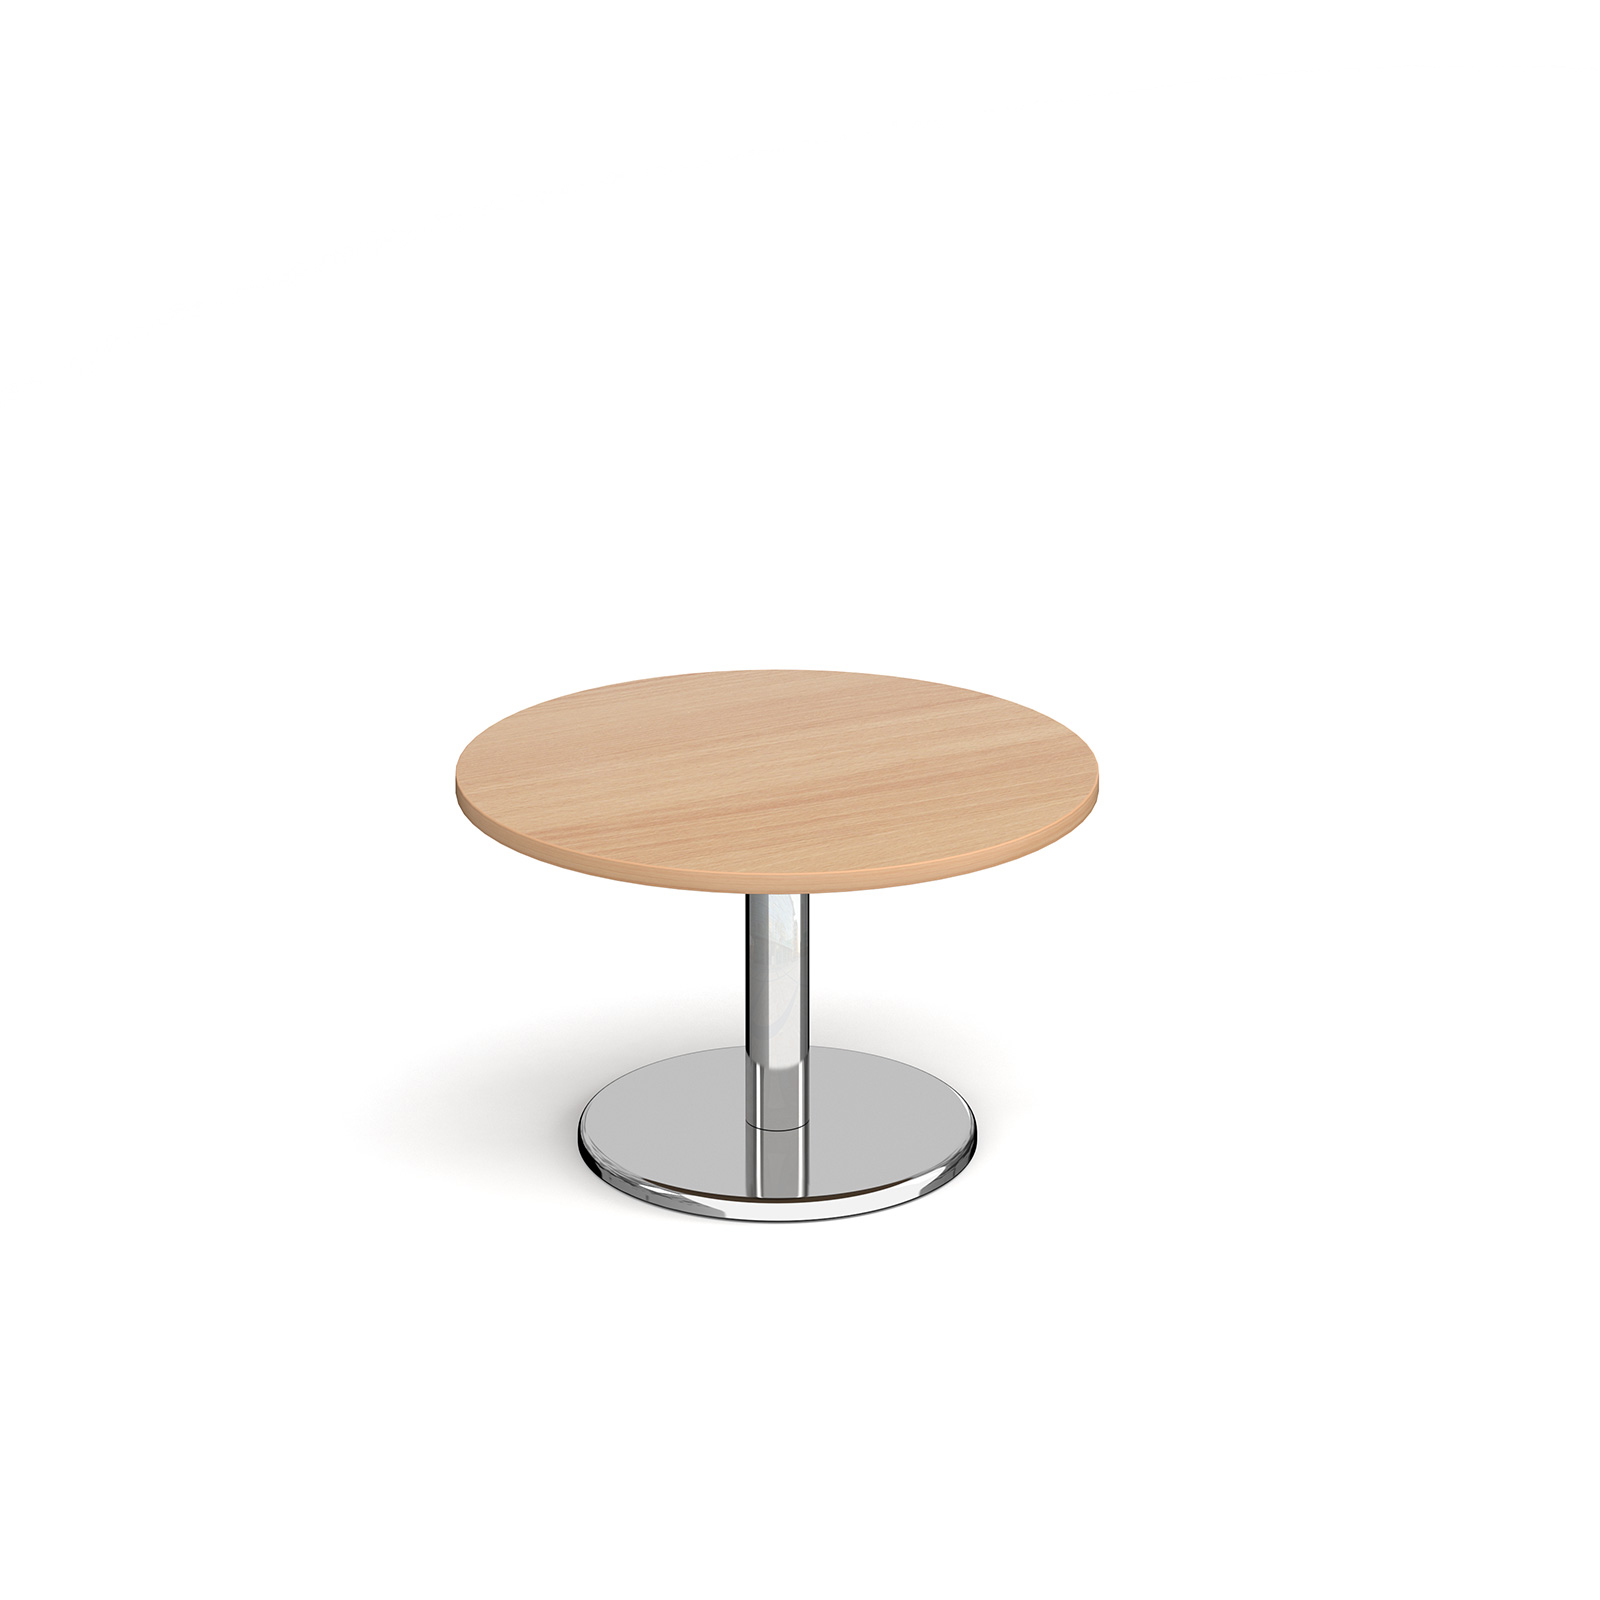 Pisa circular coffee table with round chrome base 800mm - beech